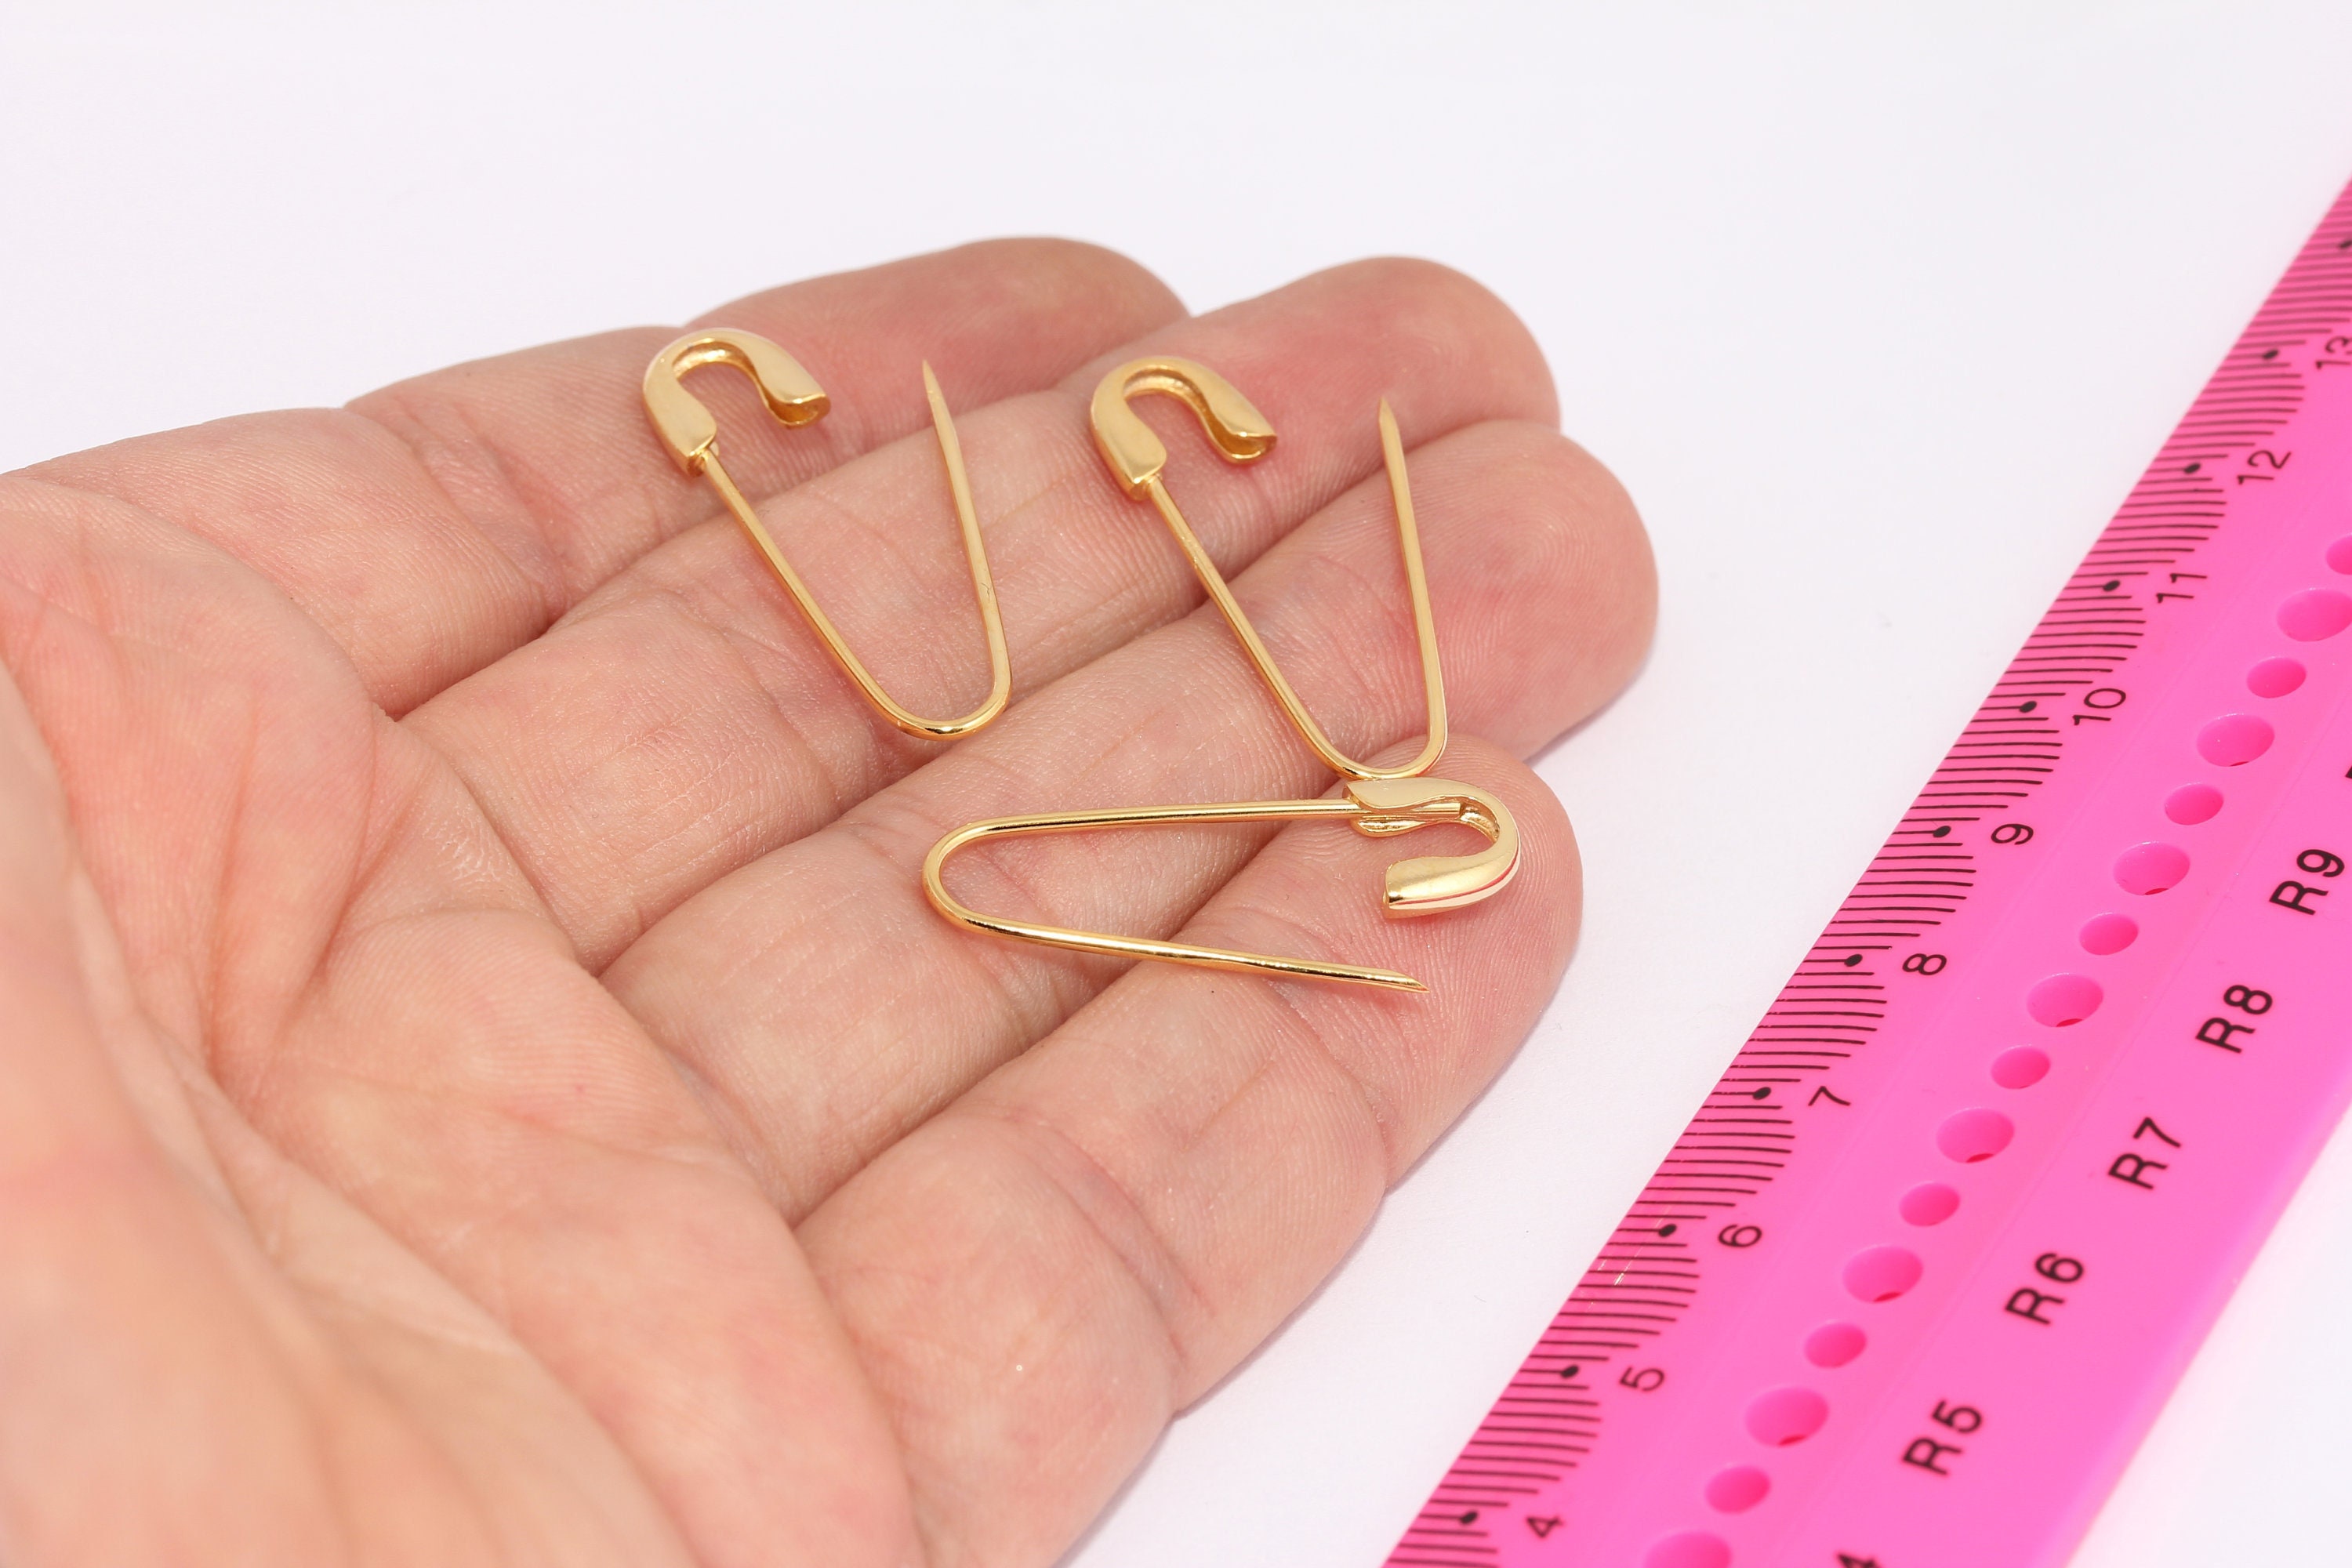 French Coil-less Safety Pins - Gold by Manhattan Wardrobe Supply